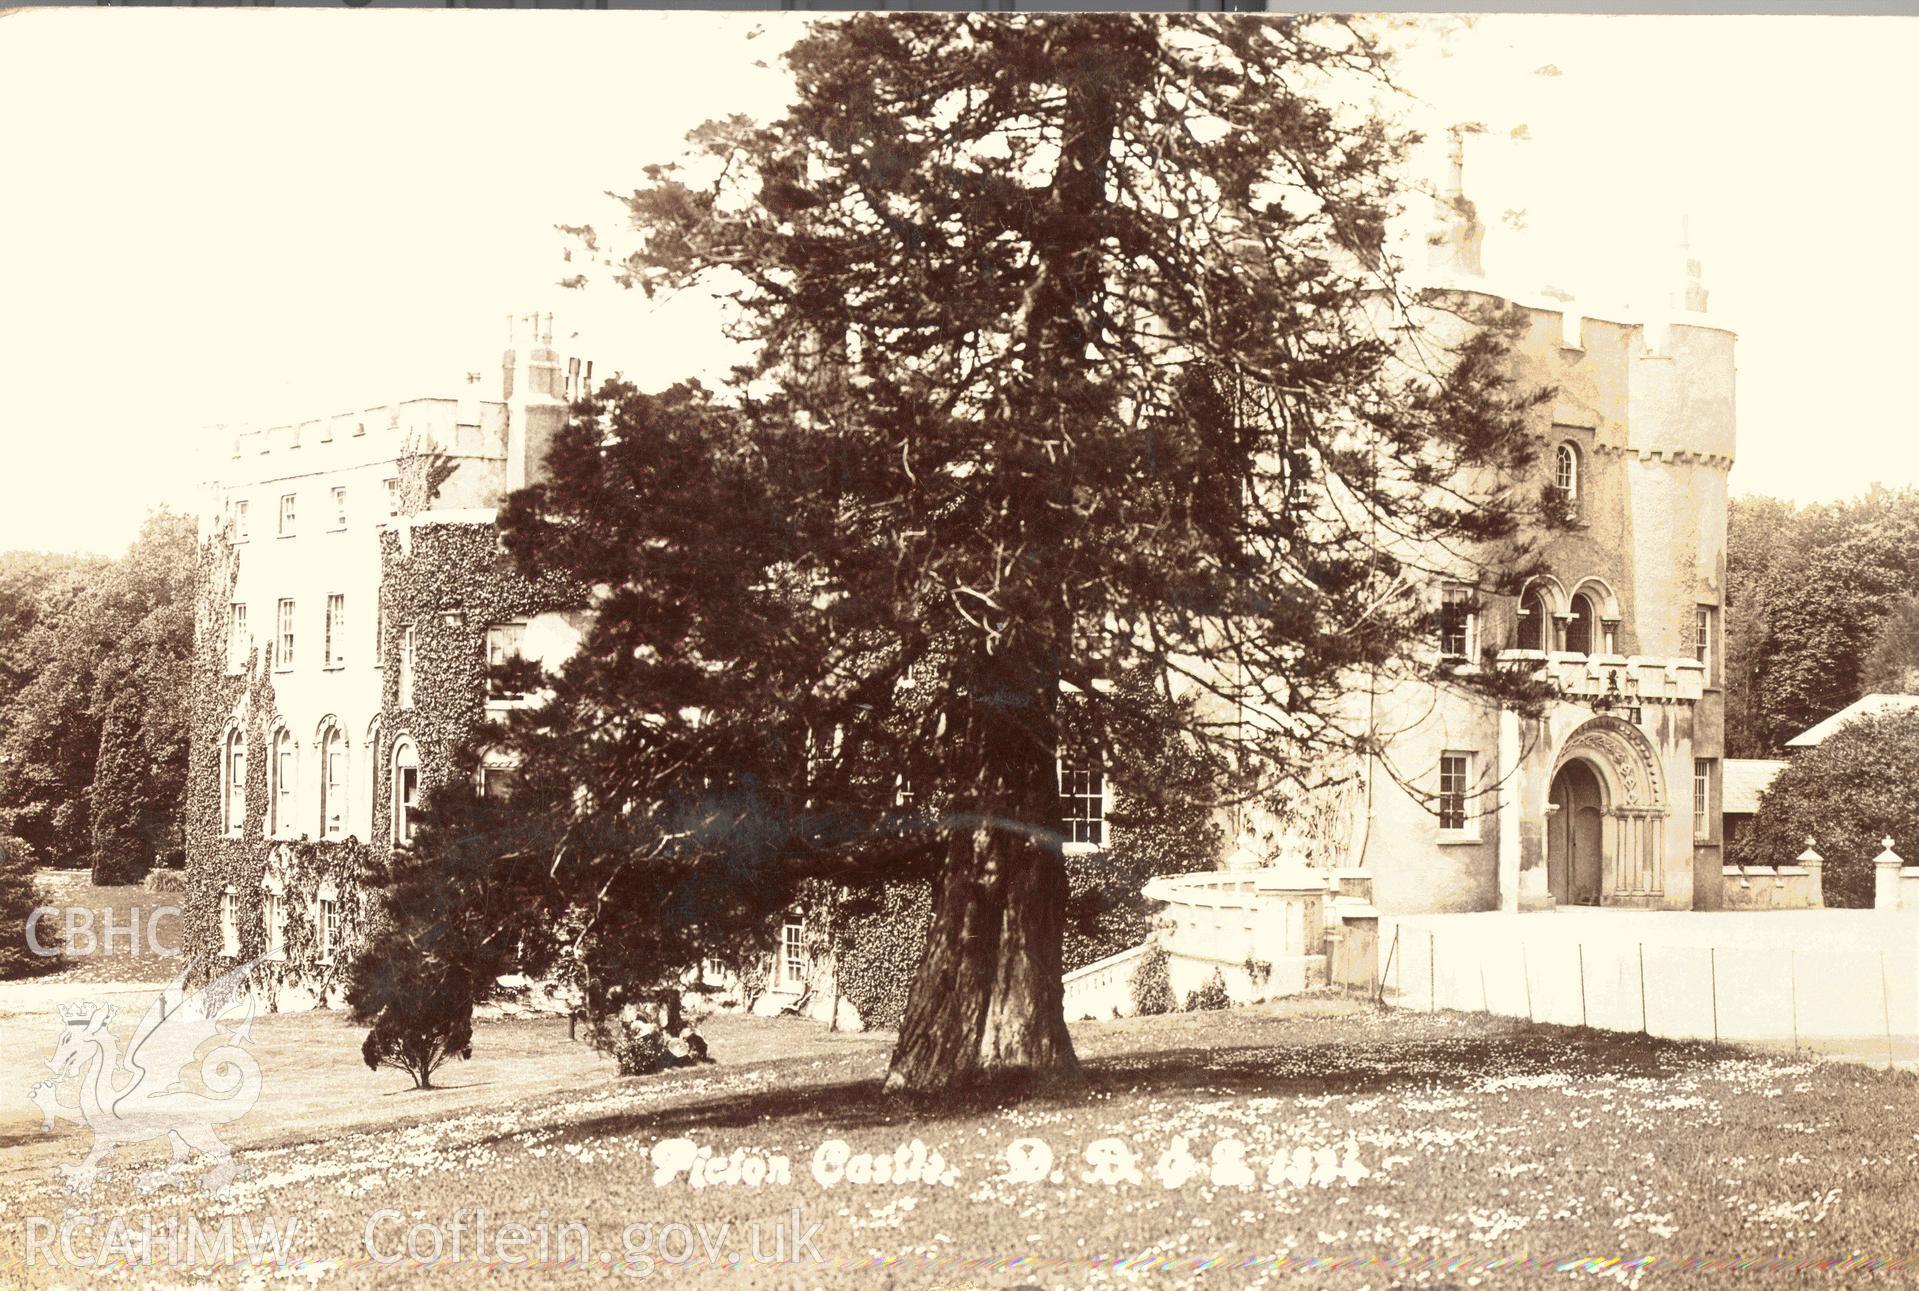 Digitised postcard image of Picton Castle, Slebech, D. Bowen and Son, Photographers, Haverfordwest. Produced by Parks and Gardens Data Services, from an original item in the Peter Davis Collection at Parks and Gardens UK. We hold only web-resolution images of this collection, suitable for viewing on screen and for research purposes only. We do not hold the original images, or publication quality scans.